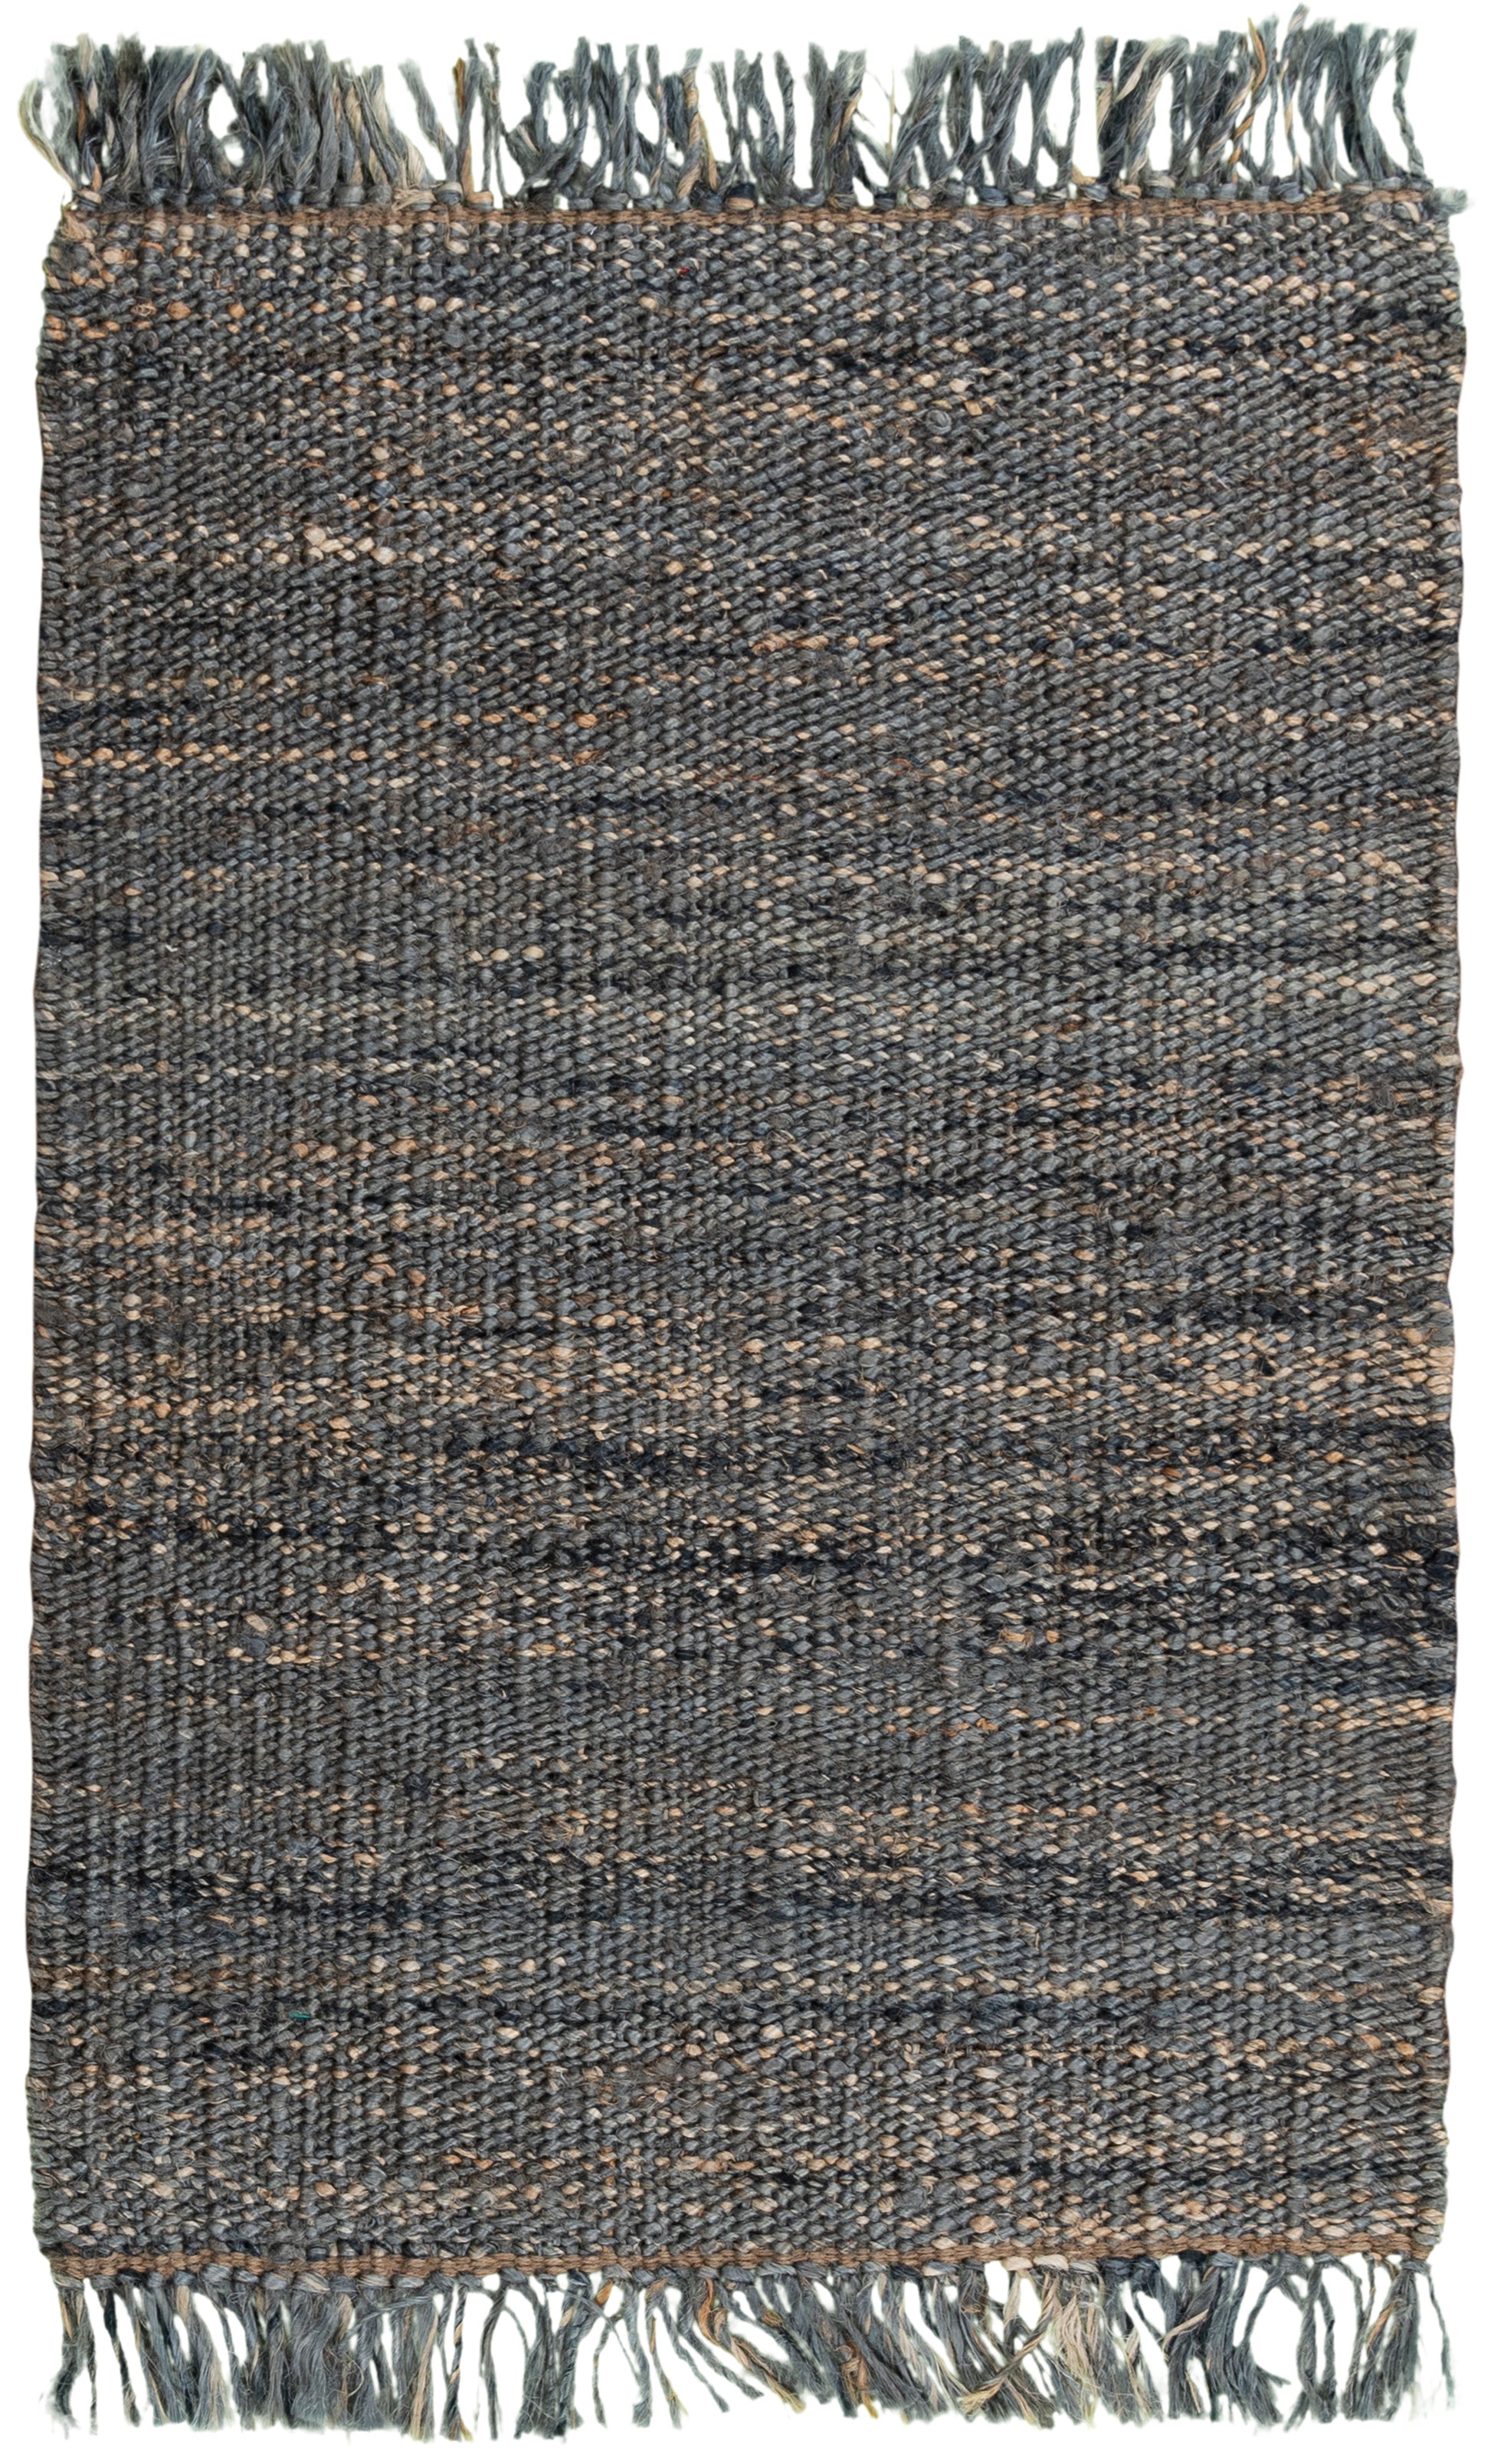 Rizzy Bengal Bnl935 Gray Area Rug